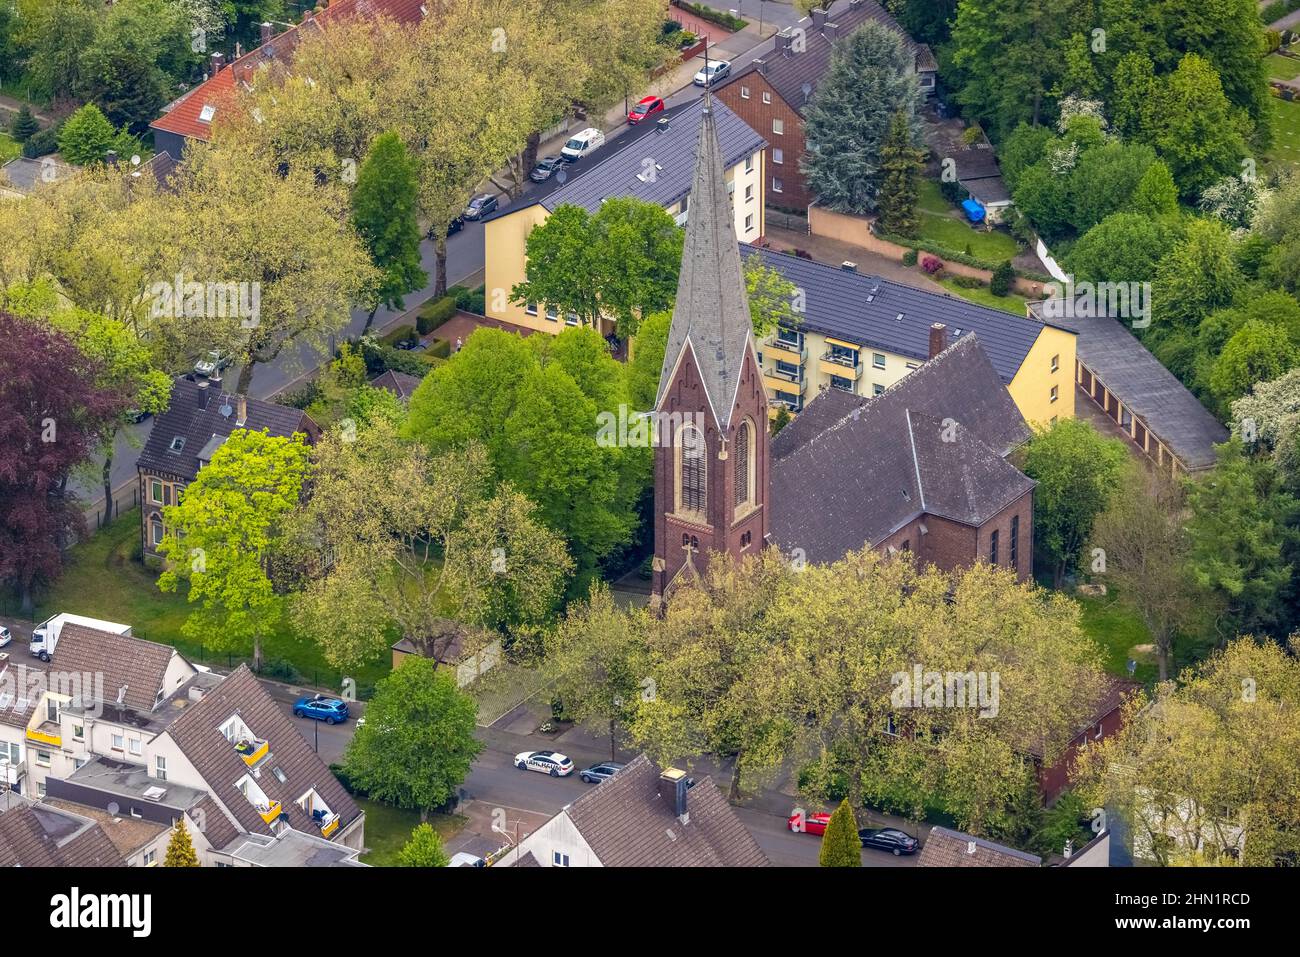 Aerial photograph, Lutheran Church, Röhlinghausen, Herne, Ruhr Area, North Rhine-Westphalia, Germany, place of worship, DE, Europe, religious communit Stock Photo